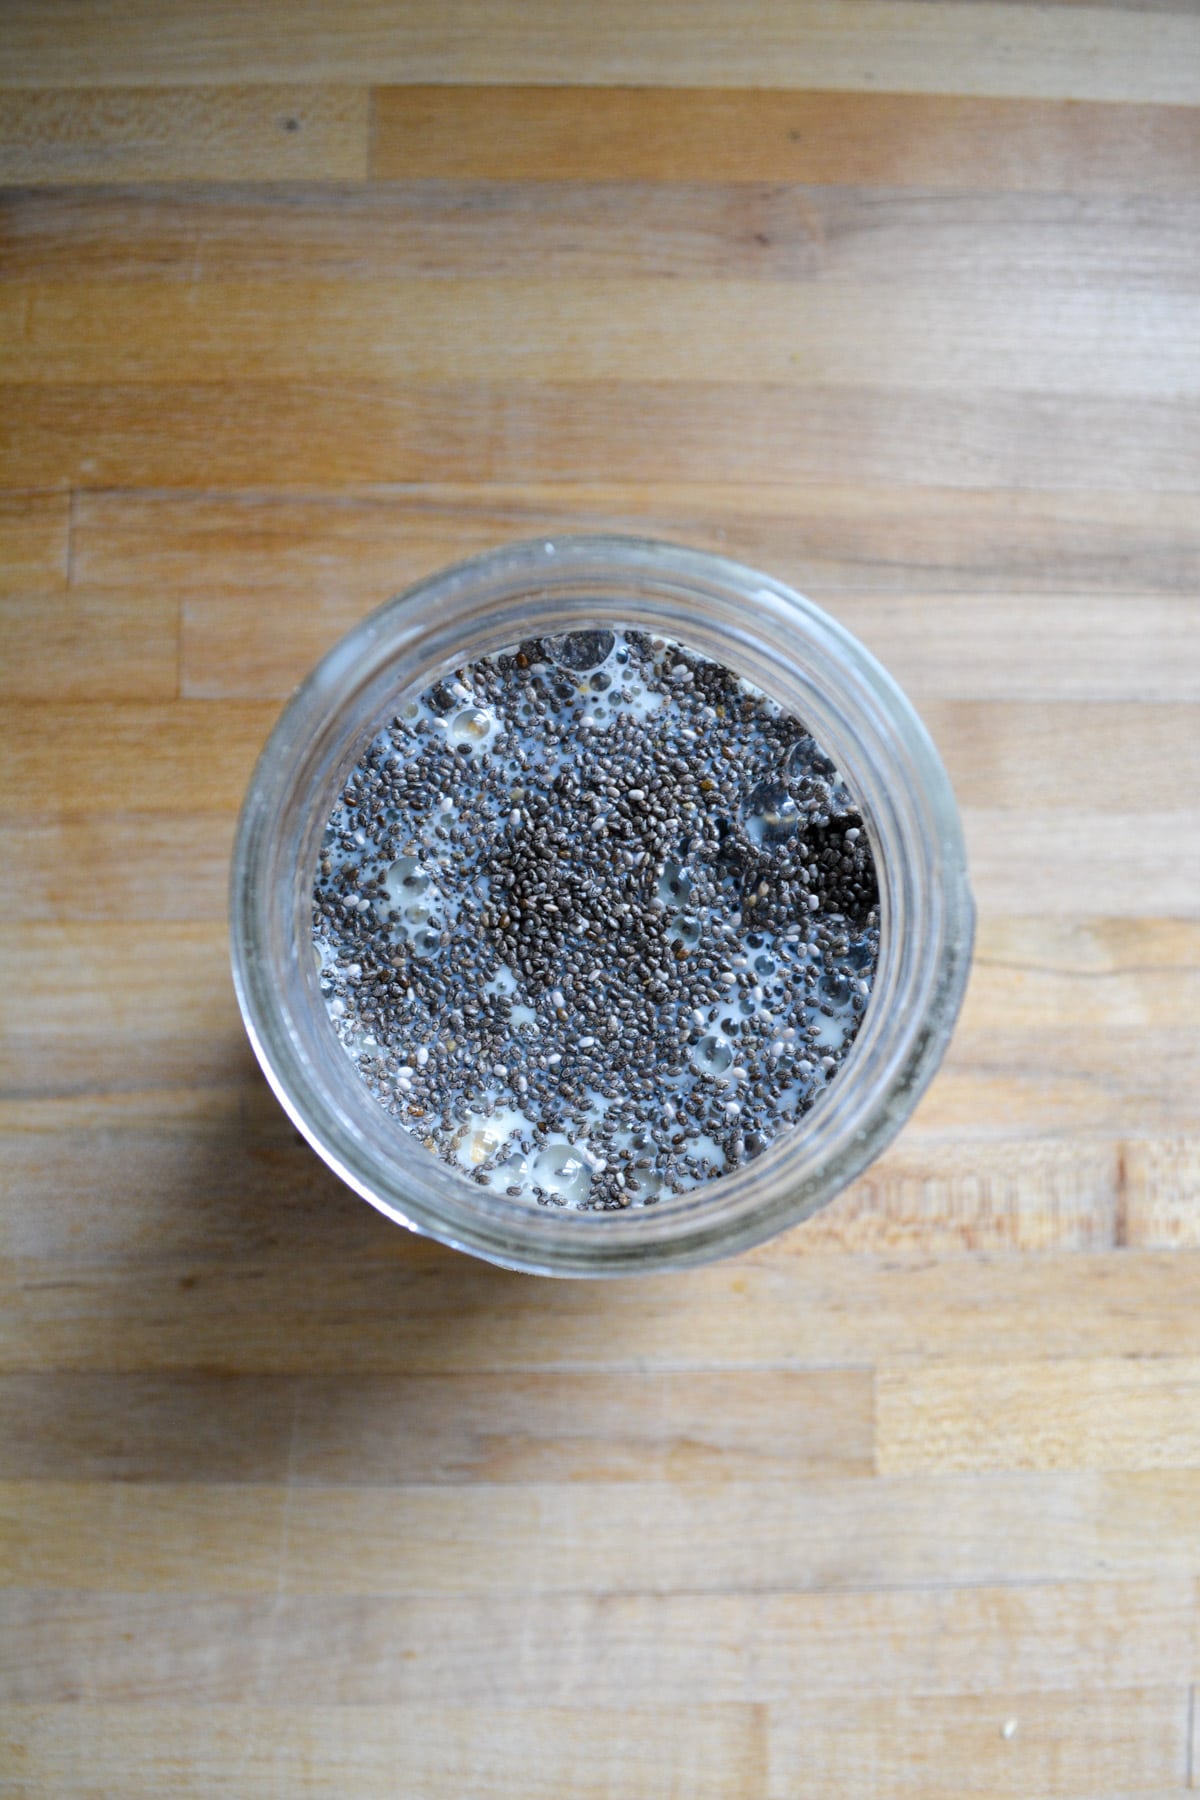 Overnight oat ingredients added to a mason jar.